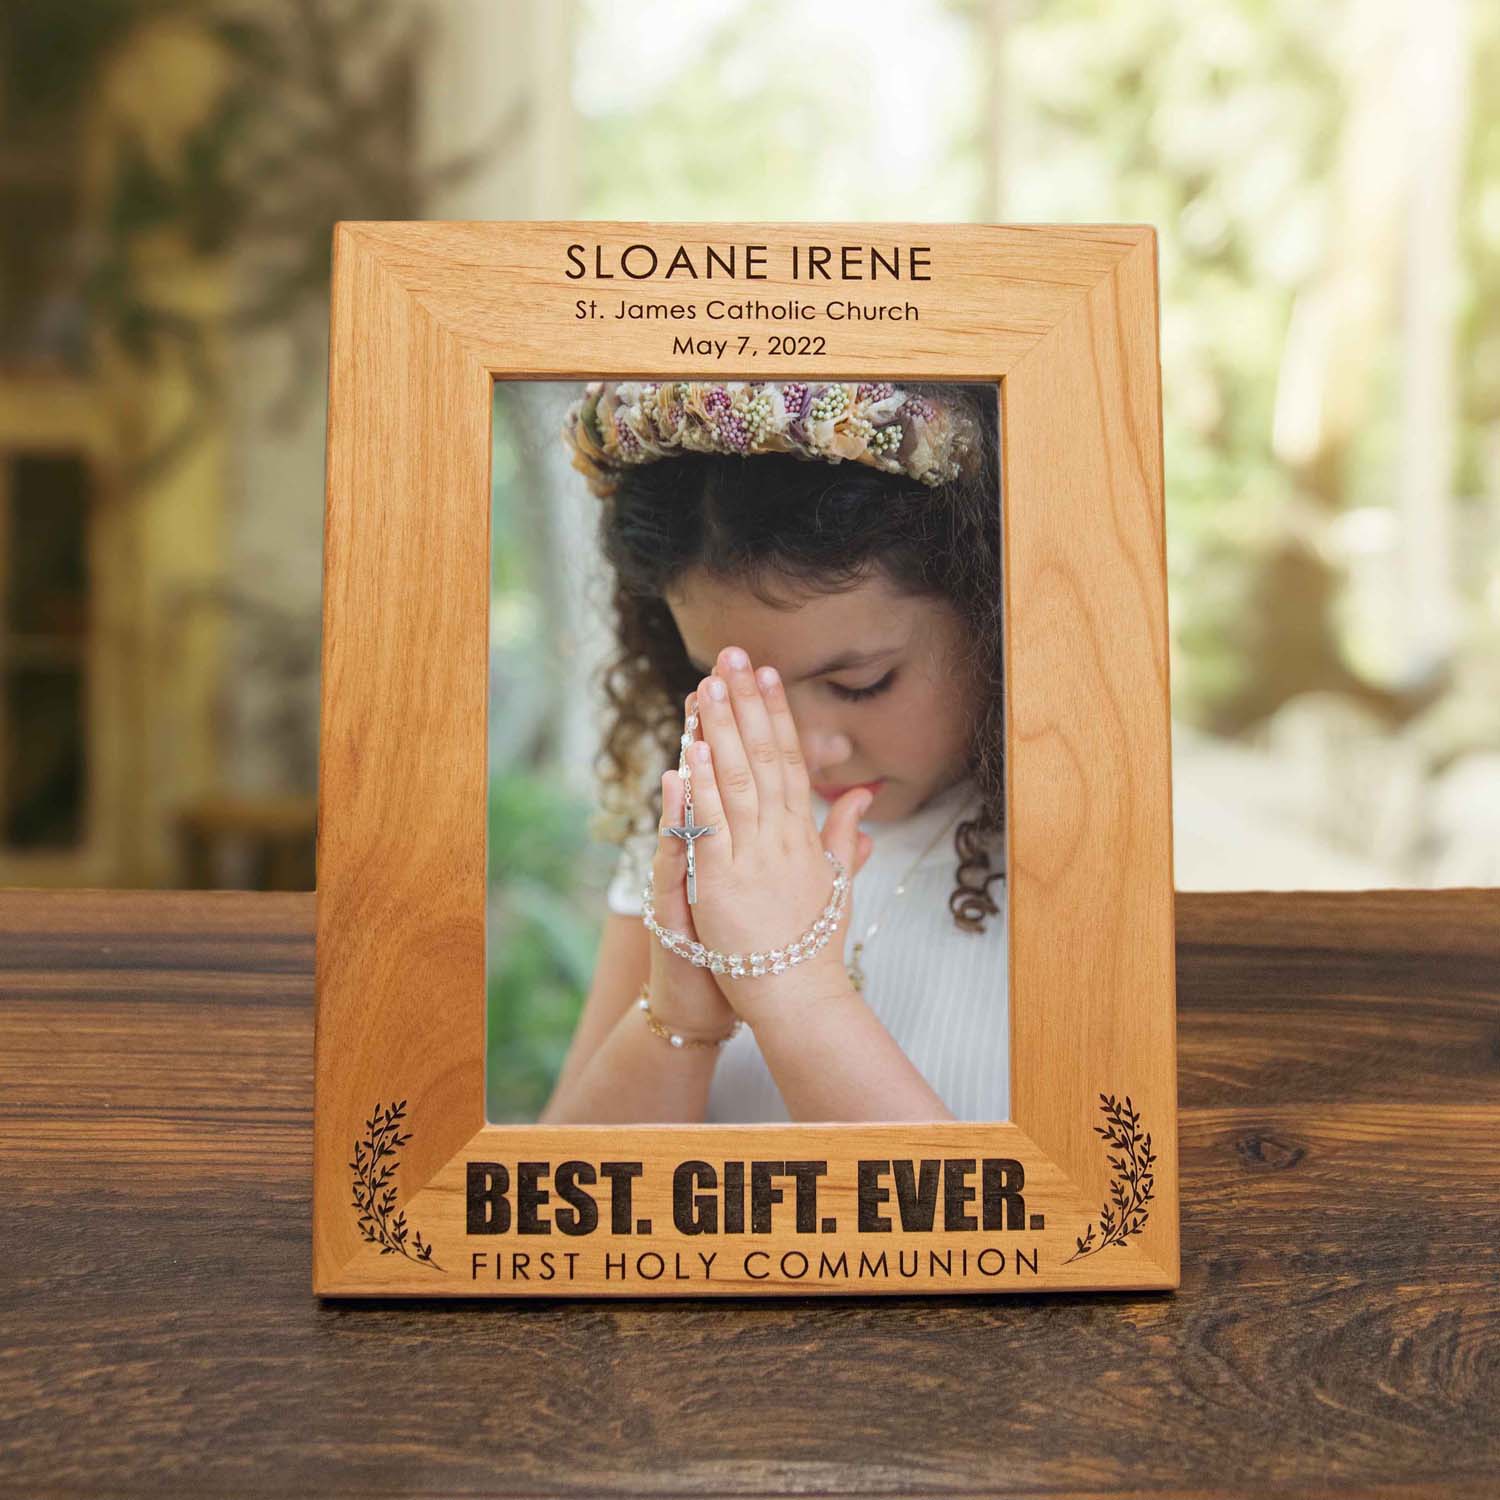 First Holy Communion Wood Picture Frame - Best Gift Ever